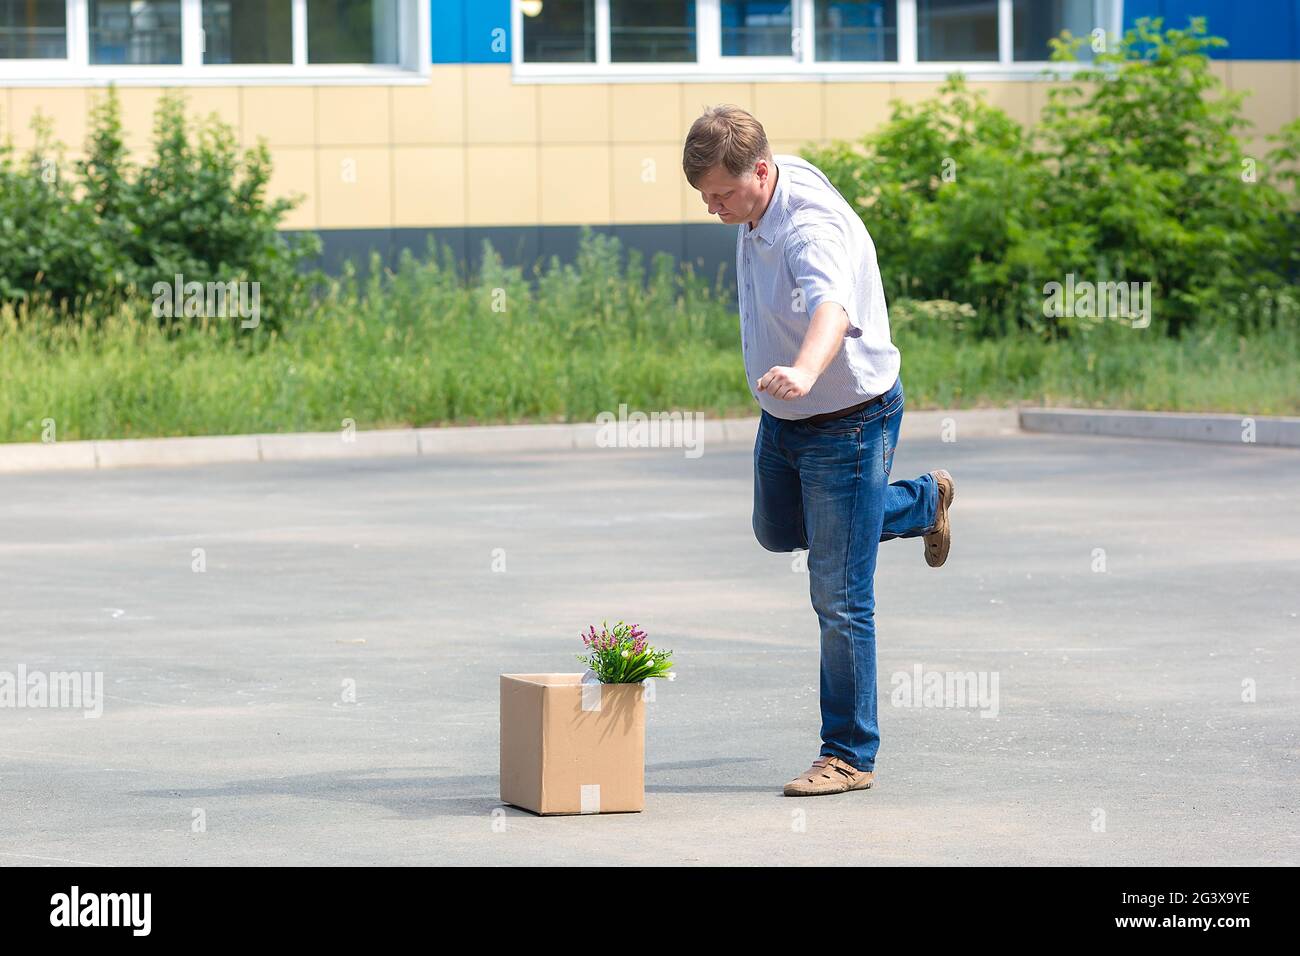 Enraged man kicks a box of personal belongings after being fired. Stock Photo